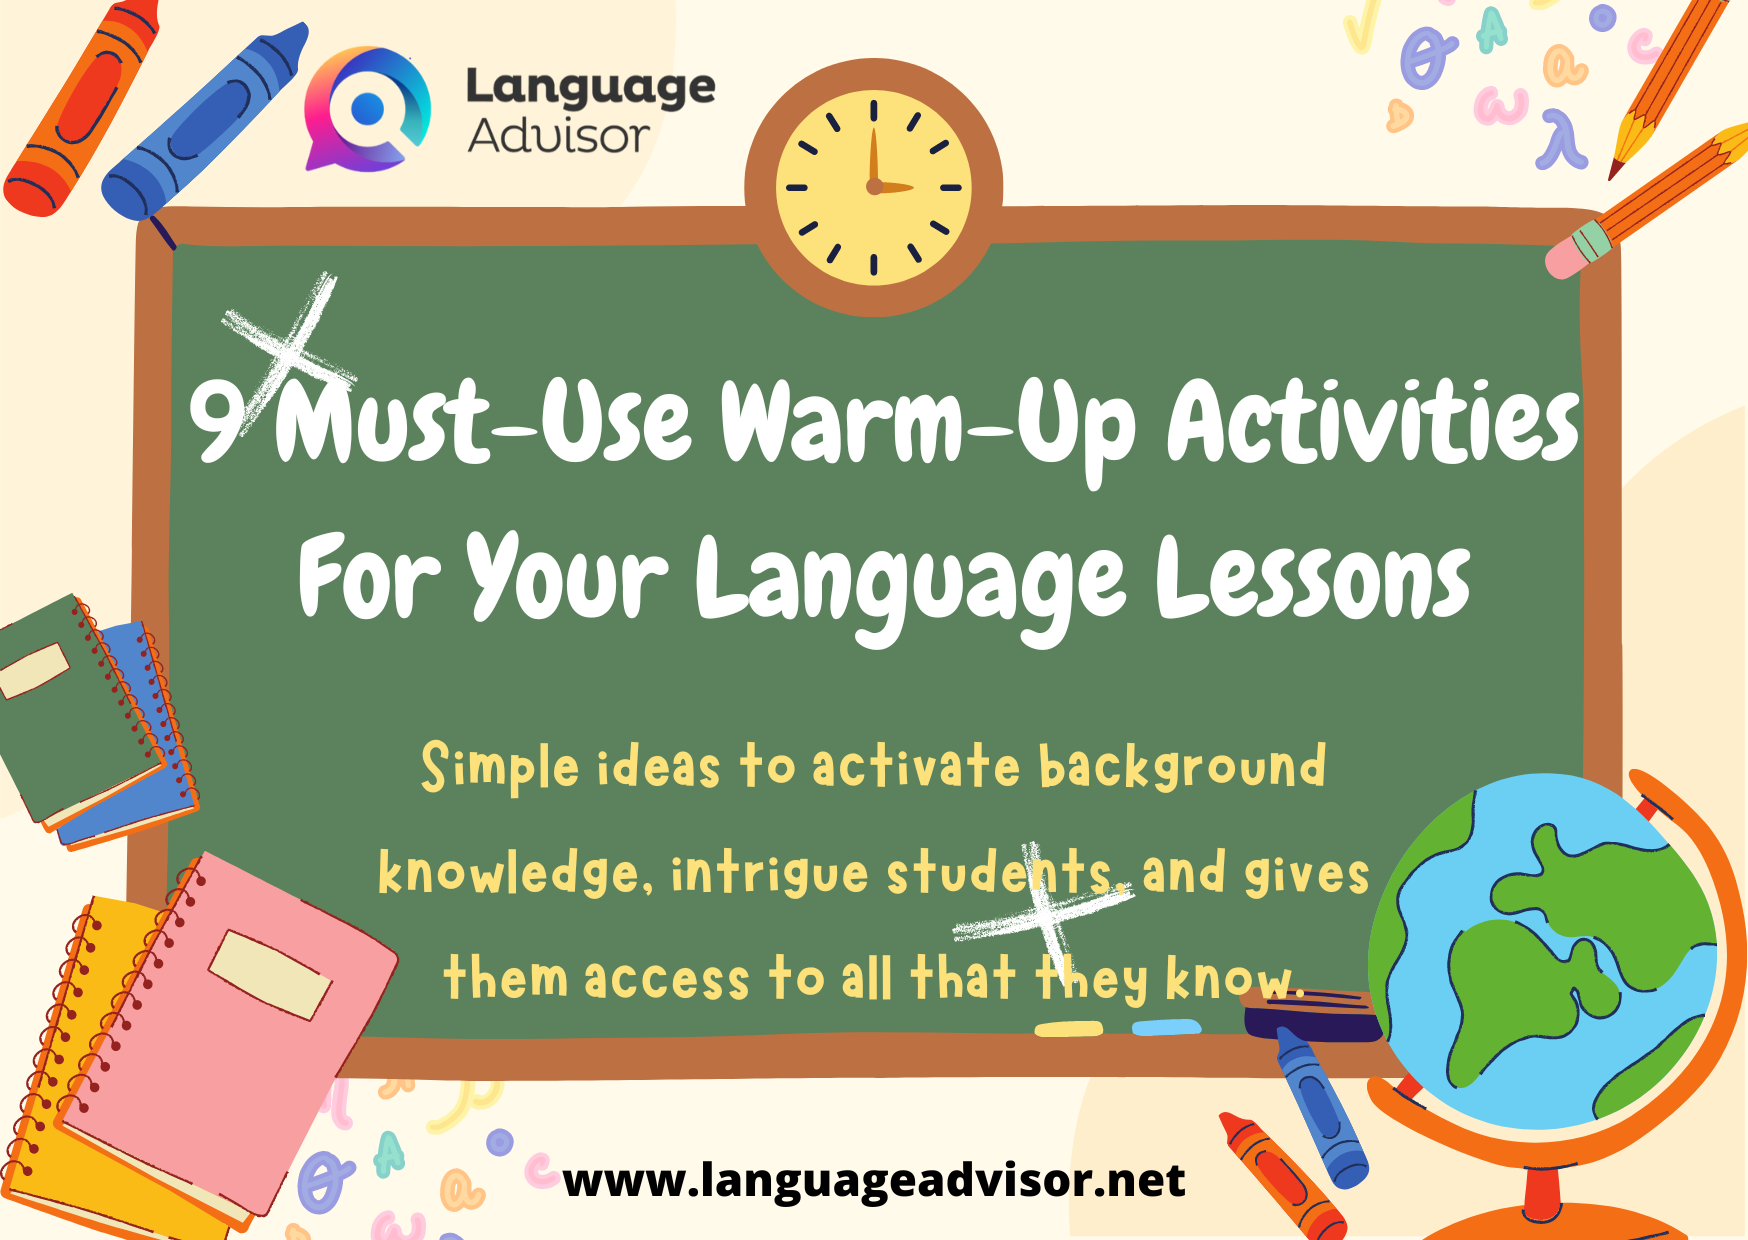 9 Must-Use Warm-Up Activities For Your Language Lessons